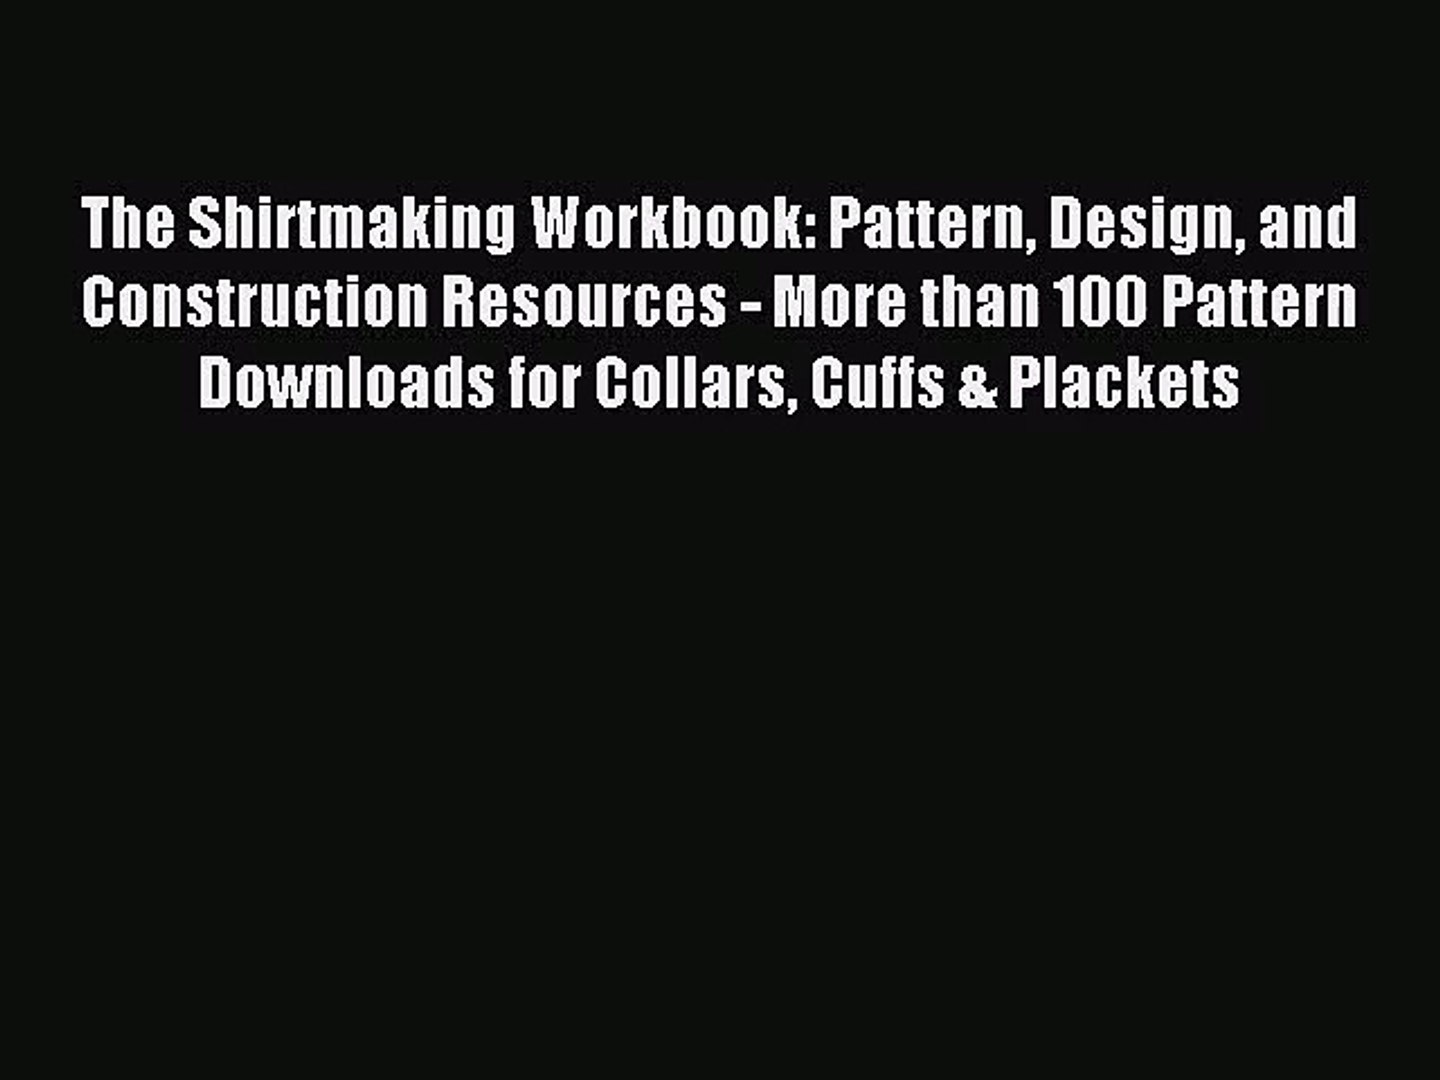 The Shirtmaking Workbook: Pattern Design and Construction Resources - More than 100 Pattern